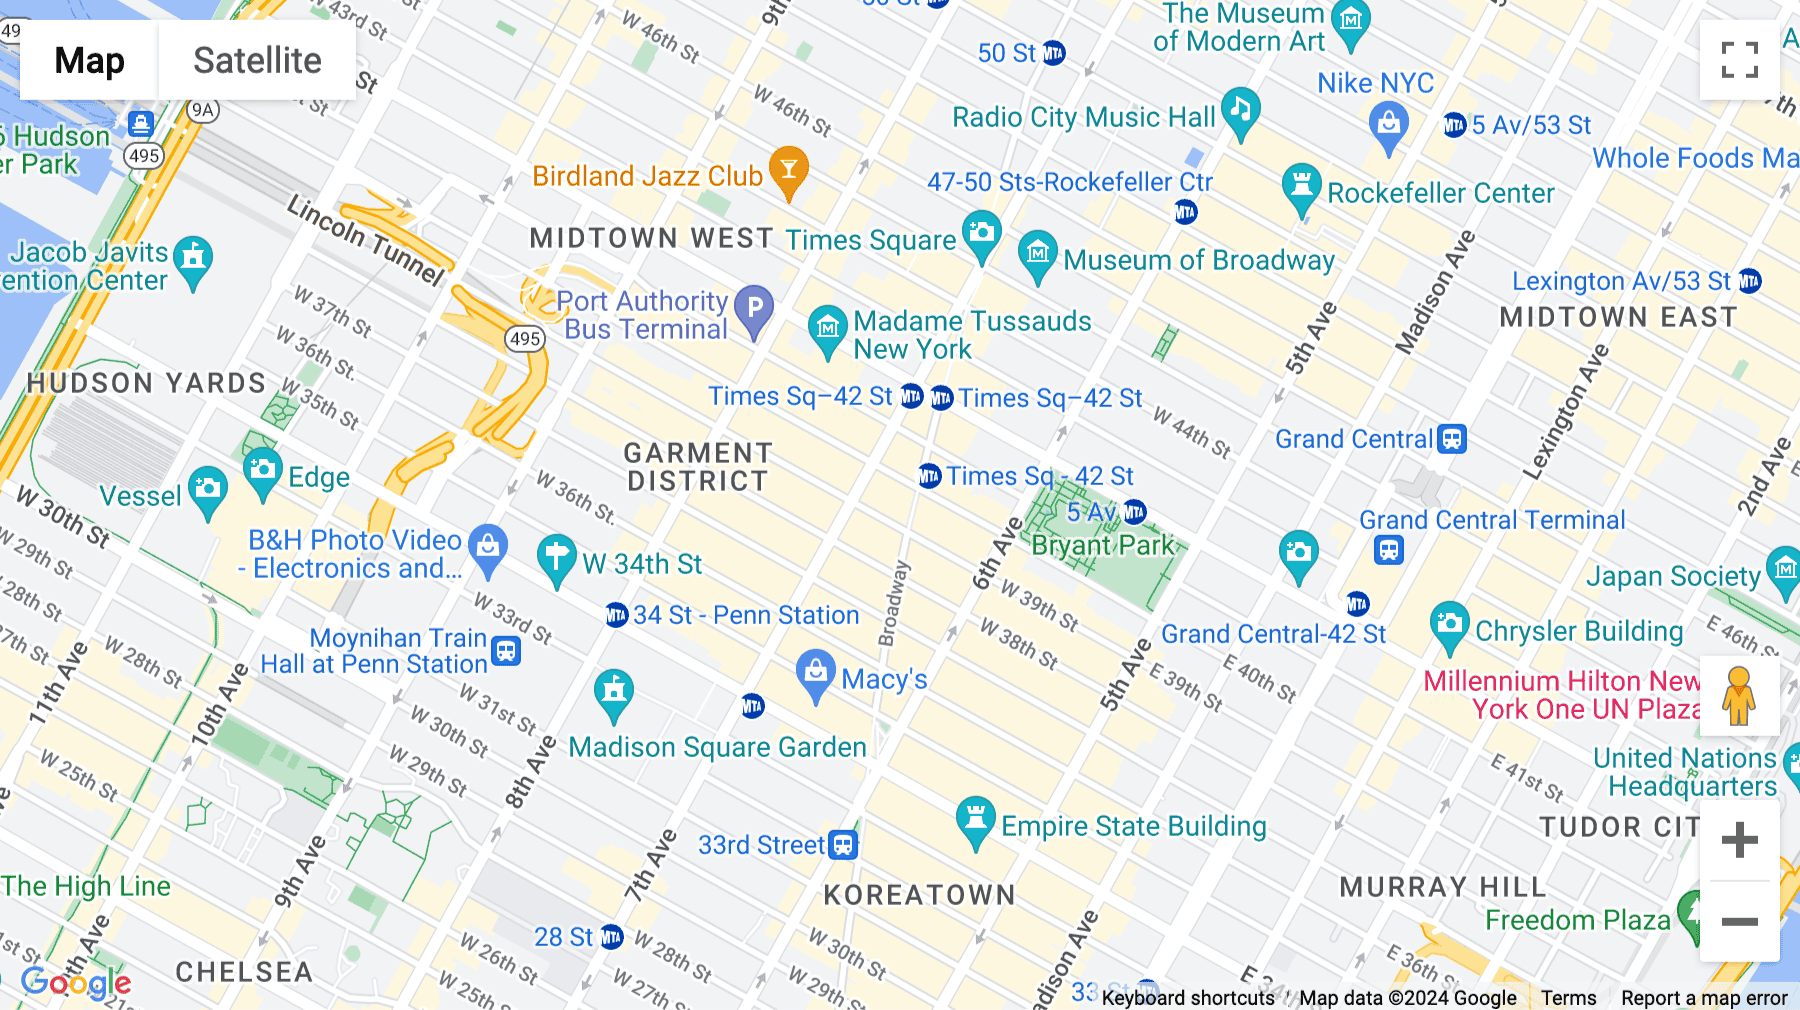 Click for interative map of 1411 Broadway, New York City